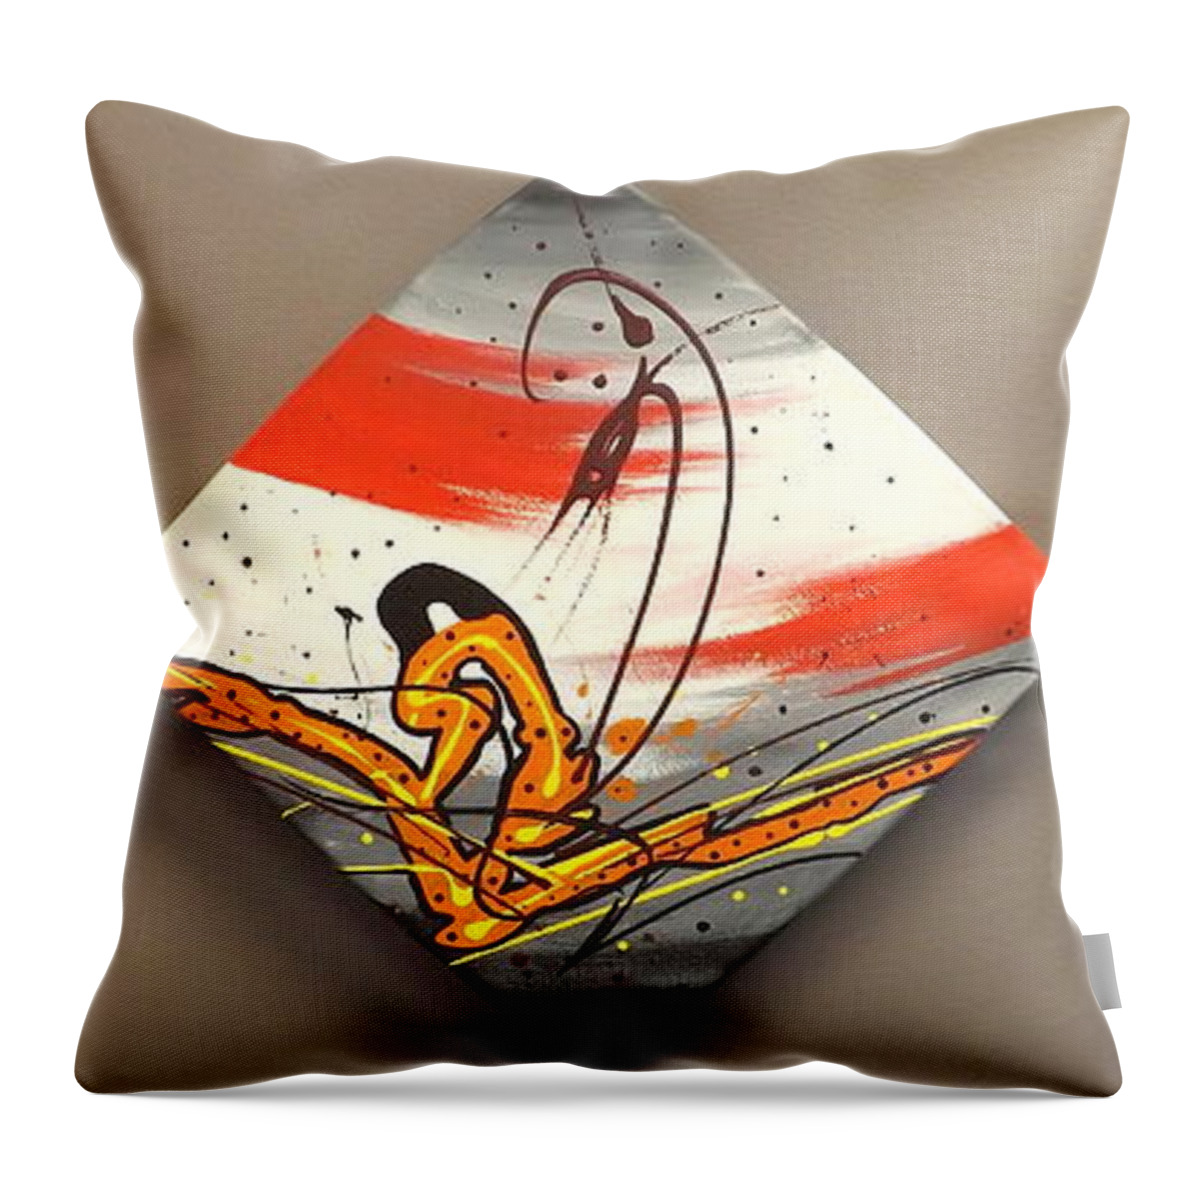 Windsurfer Throw Pillow featuring the painting Windsurfer Triptych by Darren Robinson